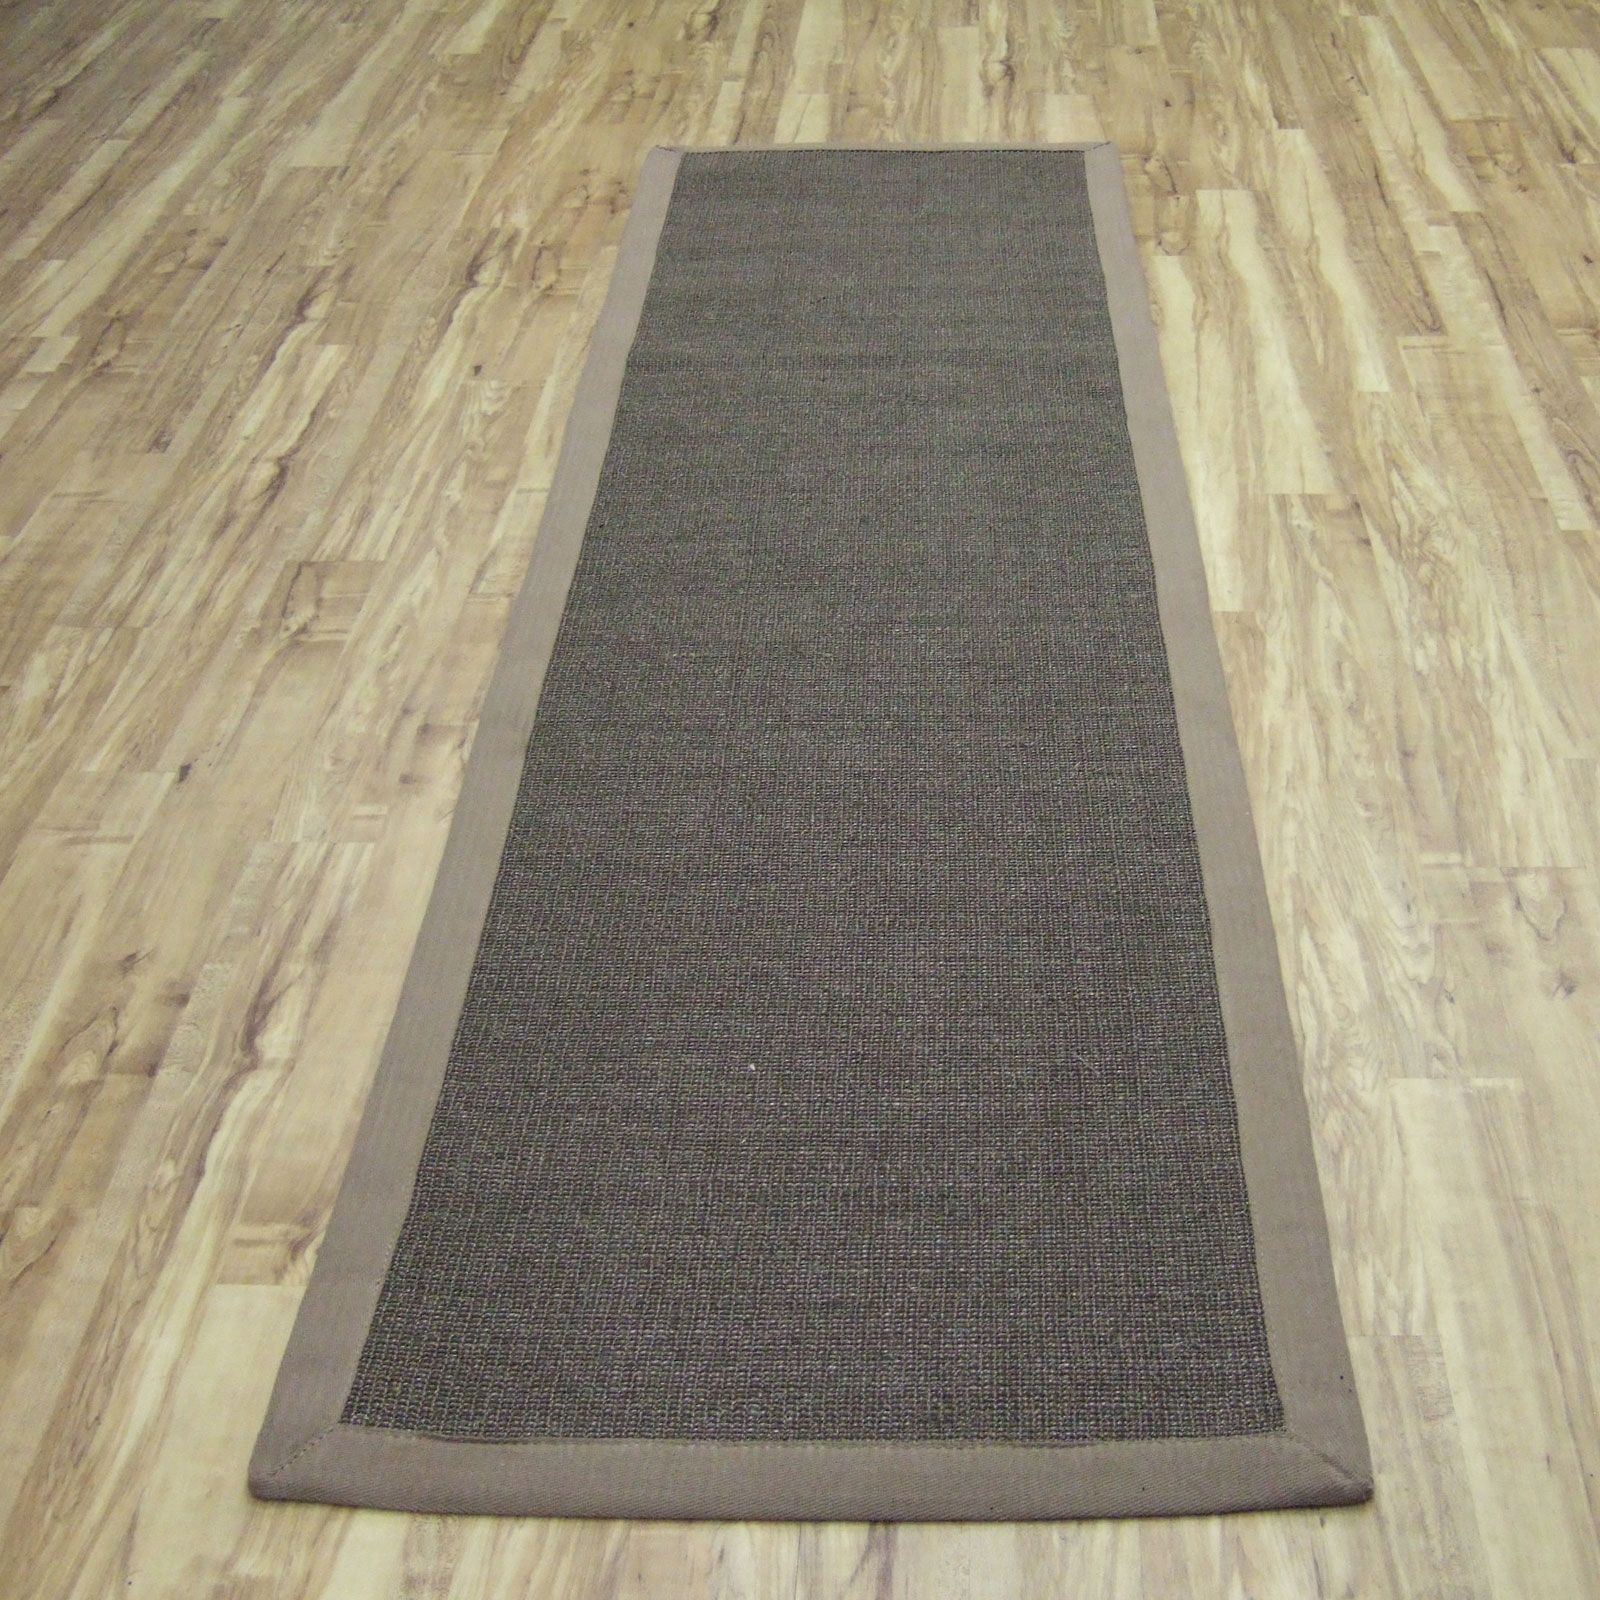 Hall Runner Rugs Uk Roselawnlutheran Within Wool Runners Hallways (View 15 of 20)